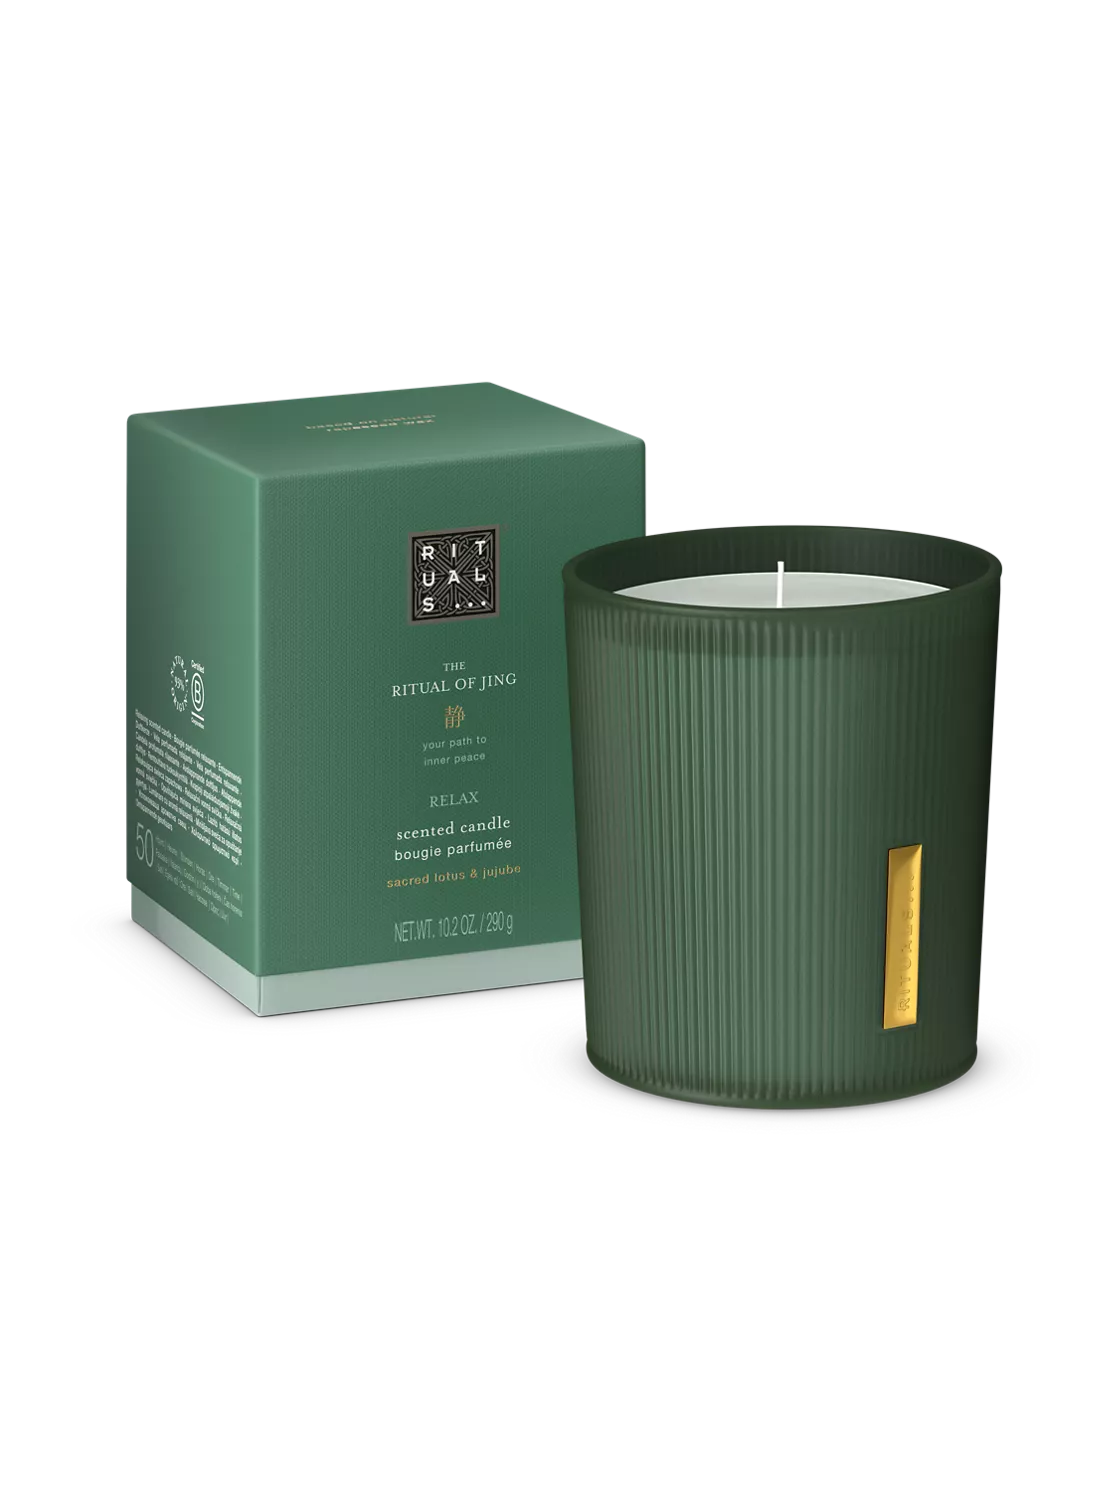 https://rituals.scene7.com/is/image/rituals/1116186-rituals-jing-scentedcandle-290g-pack-closed:3-by-4?fmt=webp-alpha&hei=1488&resMode=sharp2&wid=1116